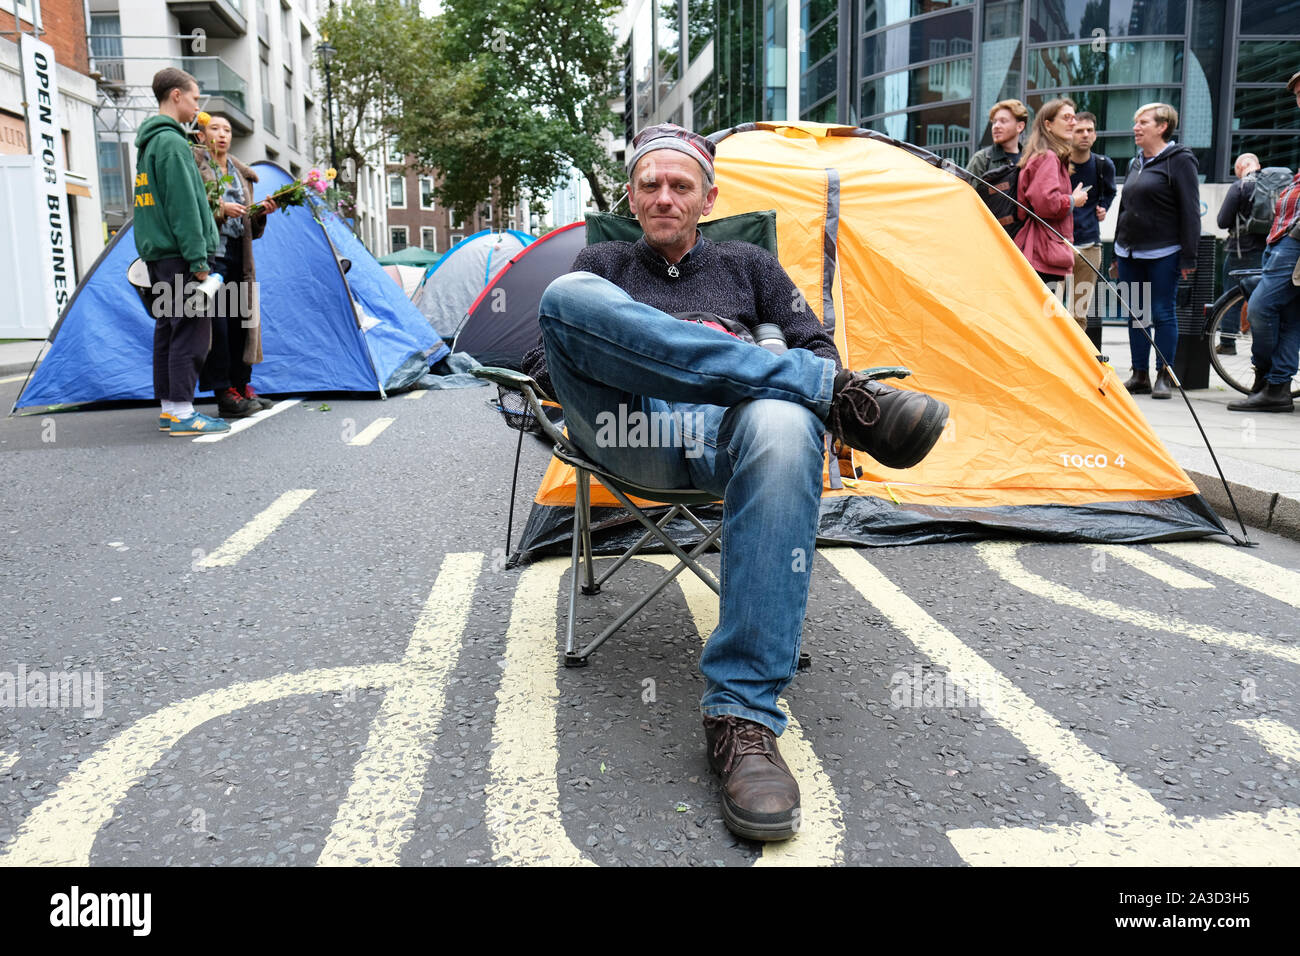 Westminster, London, UK - Monday 7th October 2019 - Extinction Rebellion XR climate protesters block Marsham Street directly outside the Home Office - some protesters have sent up tent base camps in the middle of Marsham Street.  Photo Steven May / Alamy Live News Stock Photo